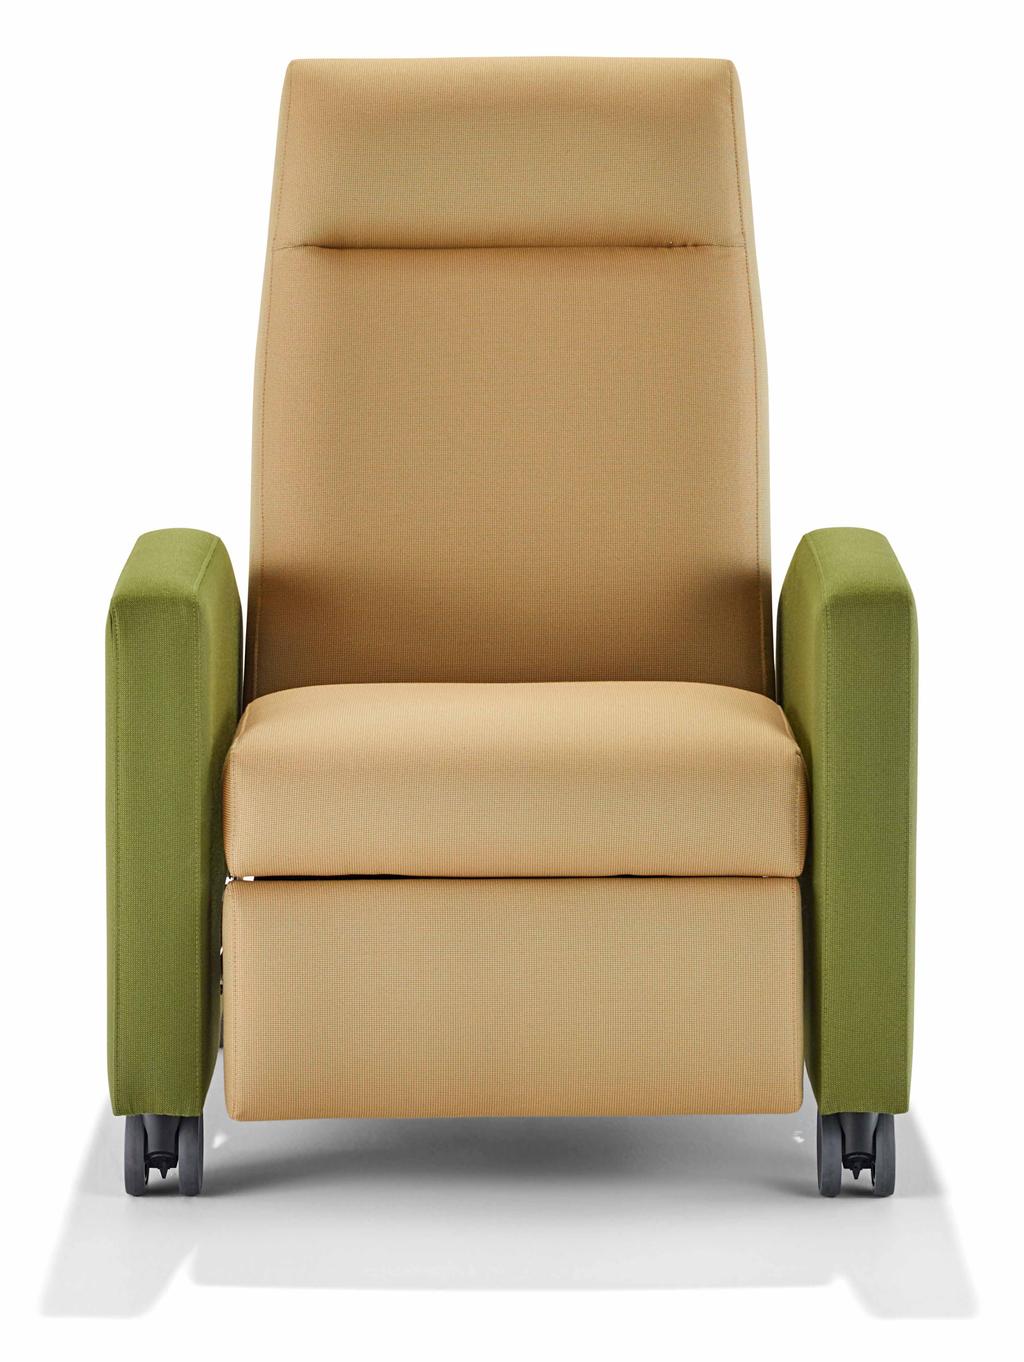 Recliners Healthcare 15 16 Auto Recliner The Auto Recliner offers patients and visitors the solace of home with a cohesive and inviting aesthetic.